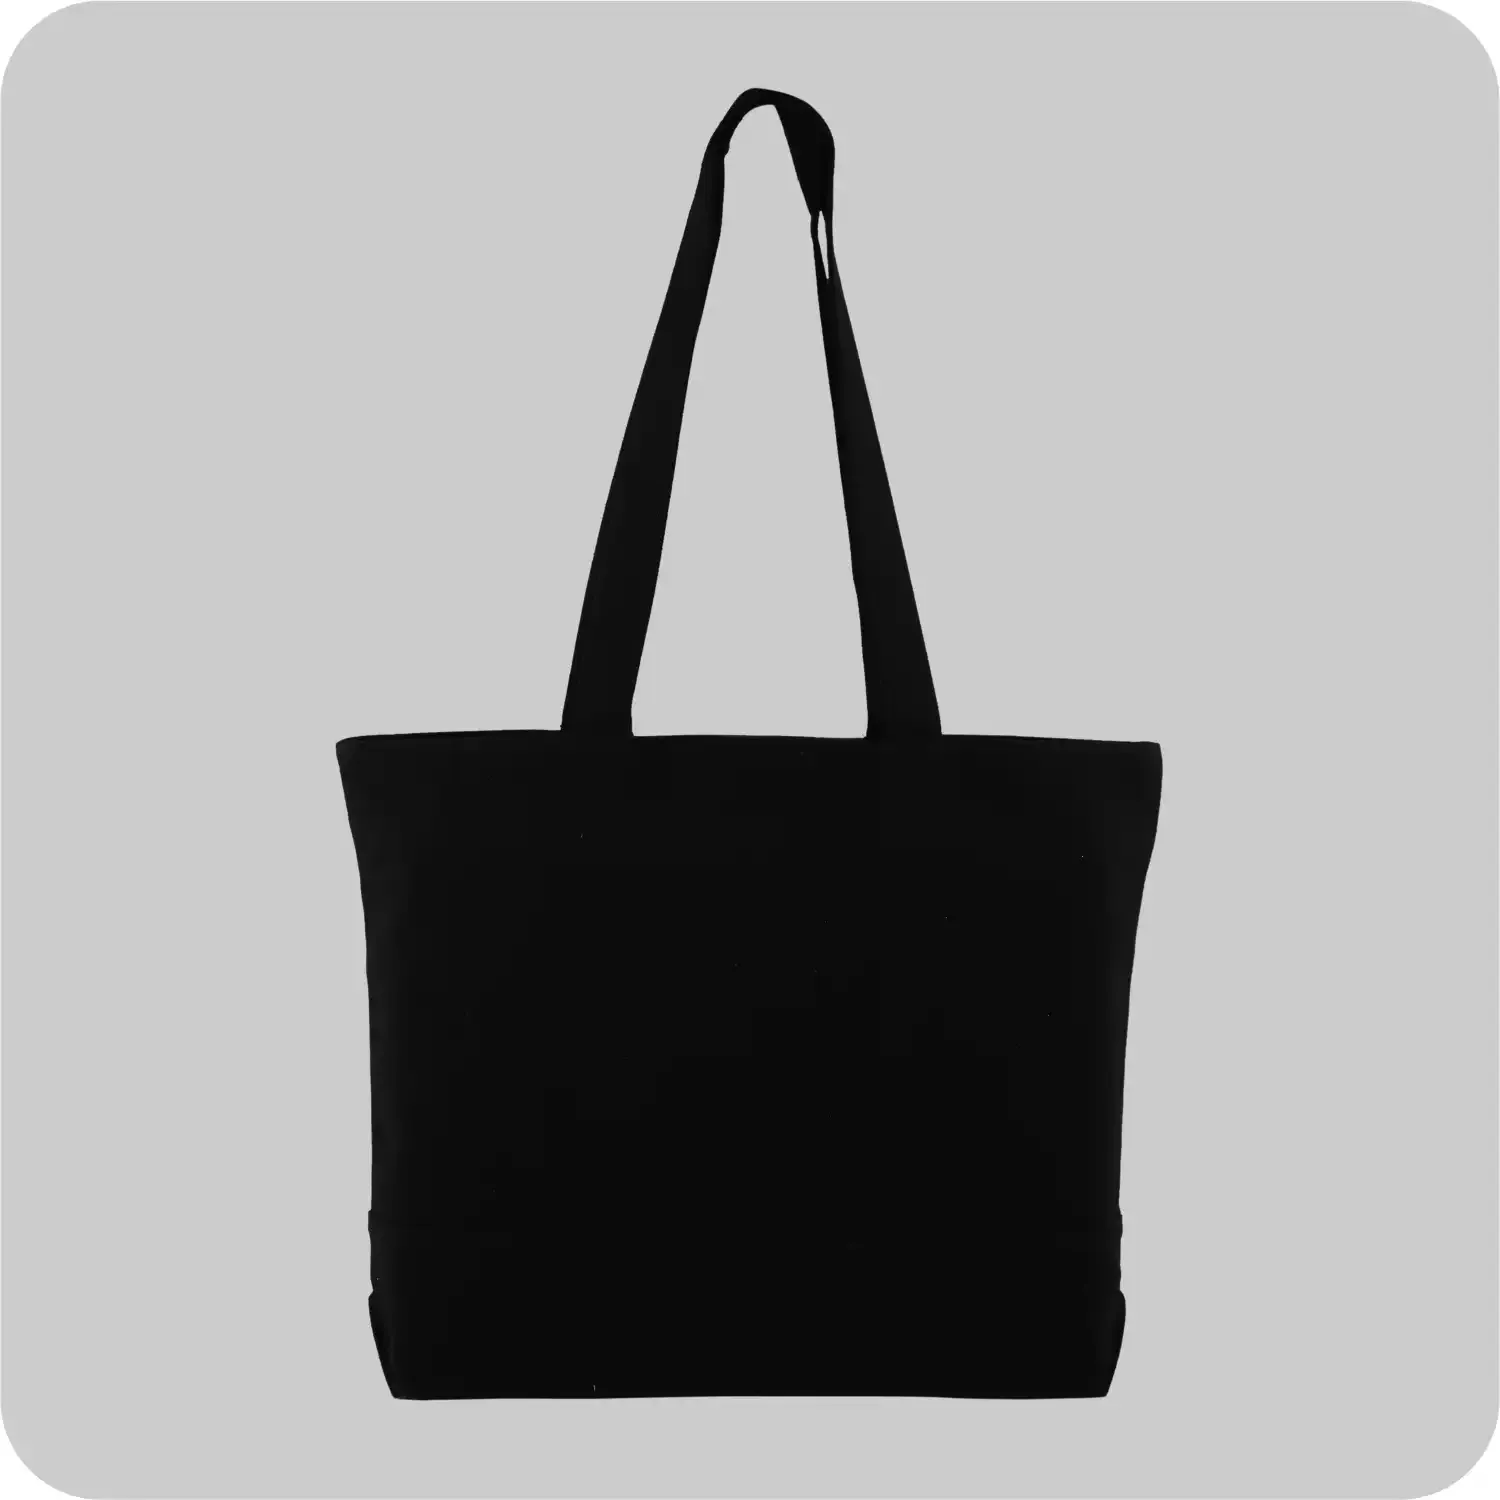 Black Canvas Bags, Convenient Multiutility bags, with Affordable Price